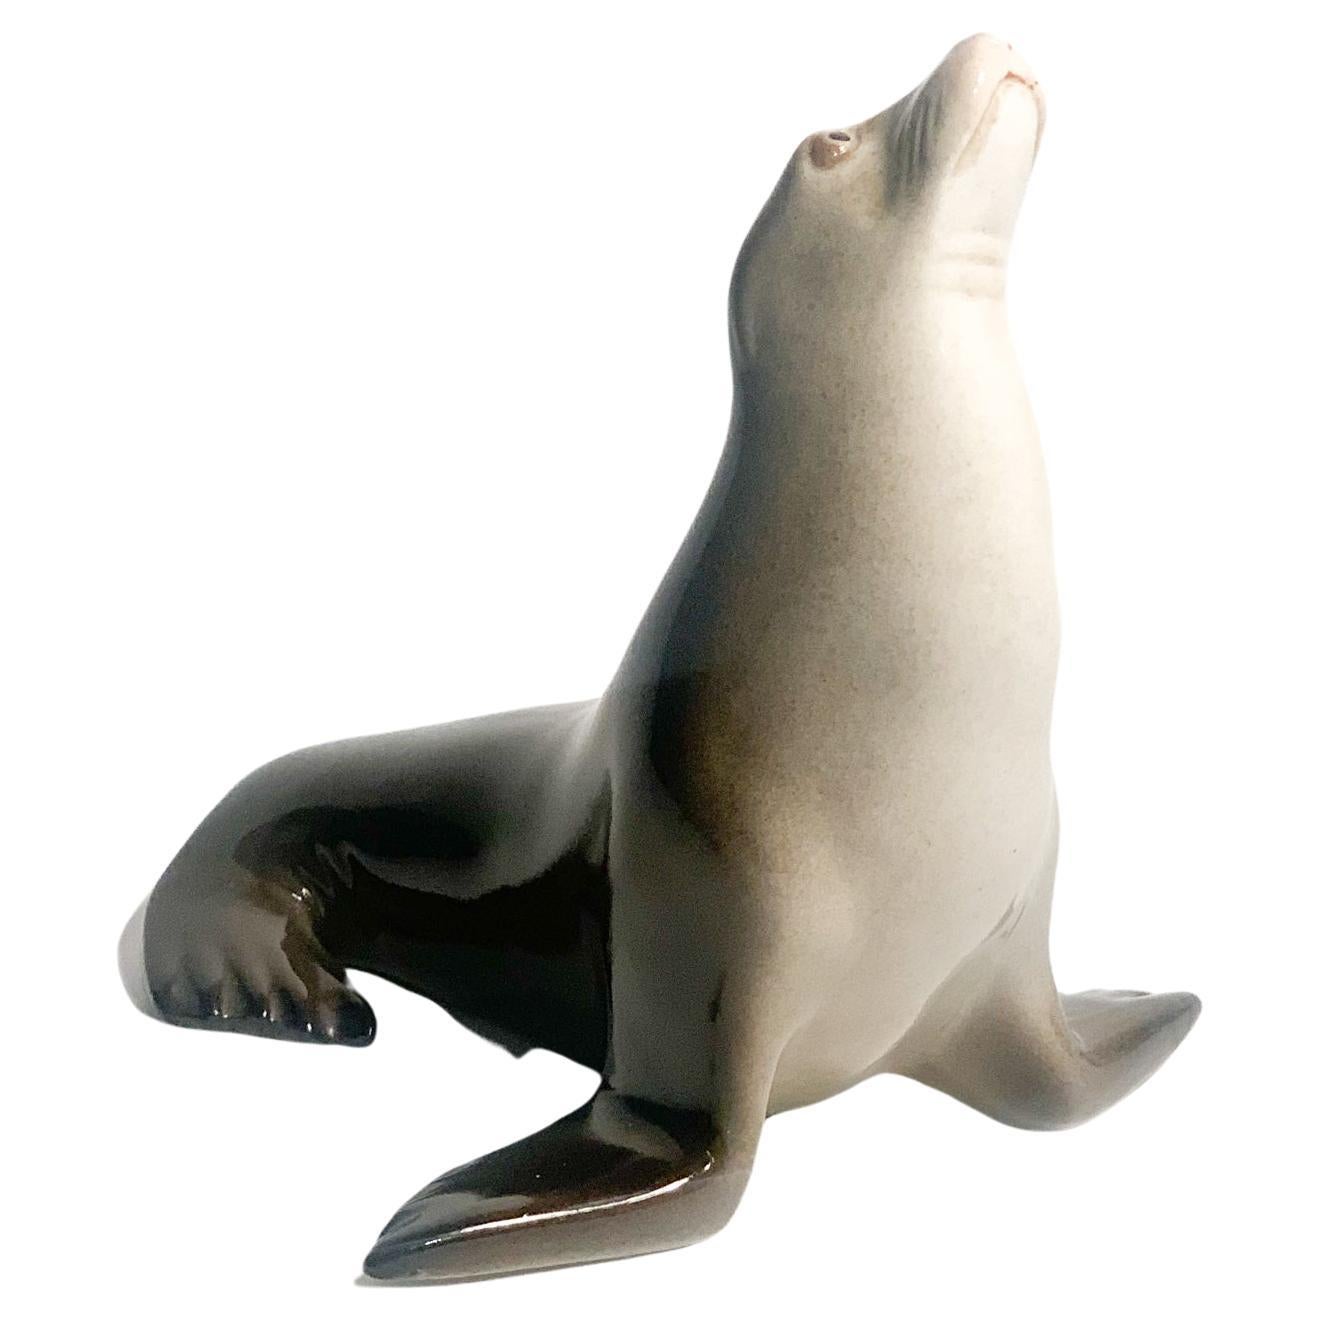 URSS Ceramic Sculpture of a Seal from the 1940s For Sale